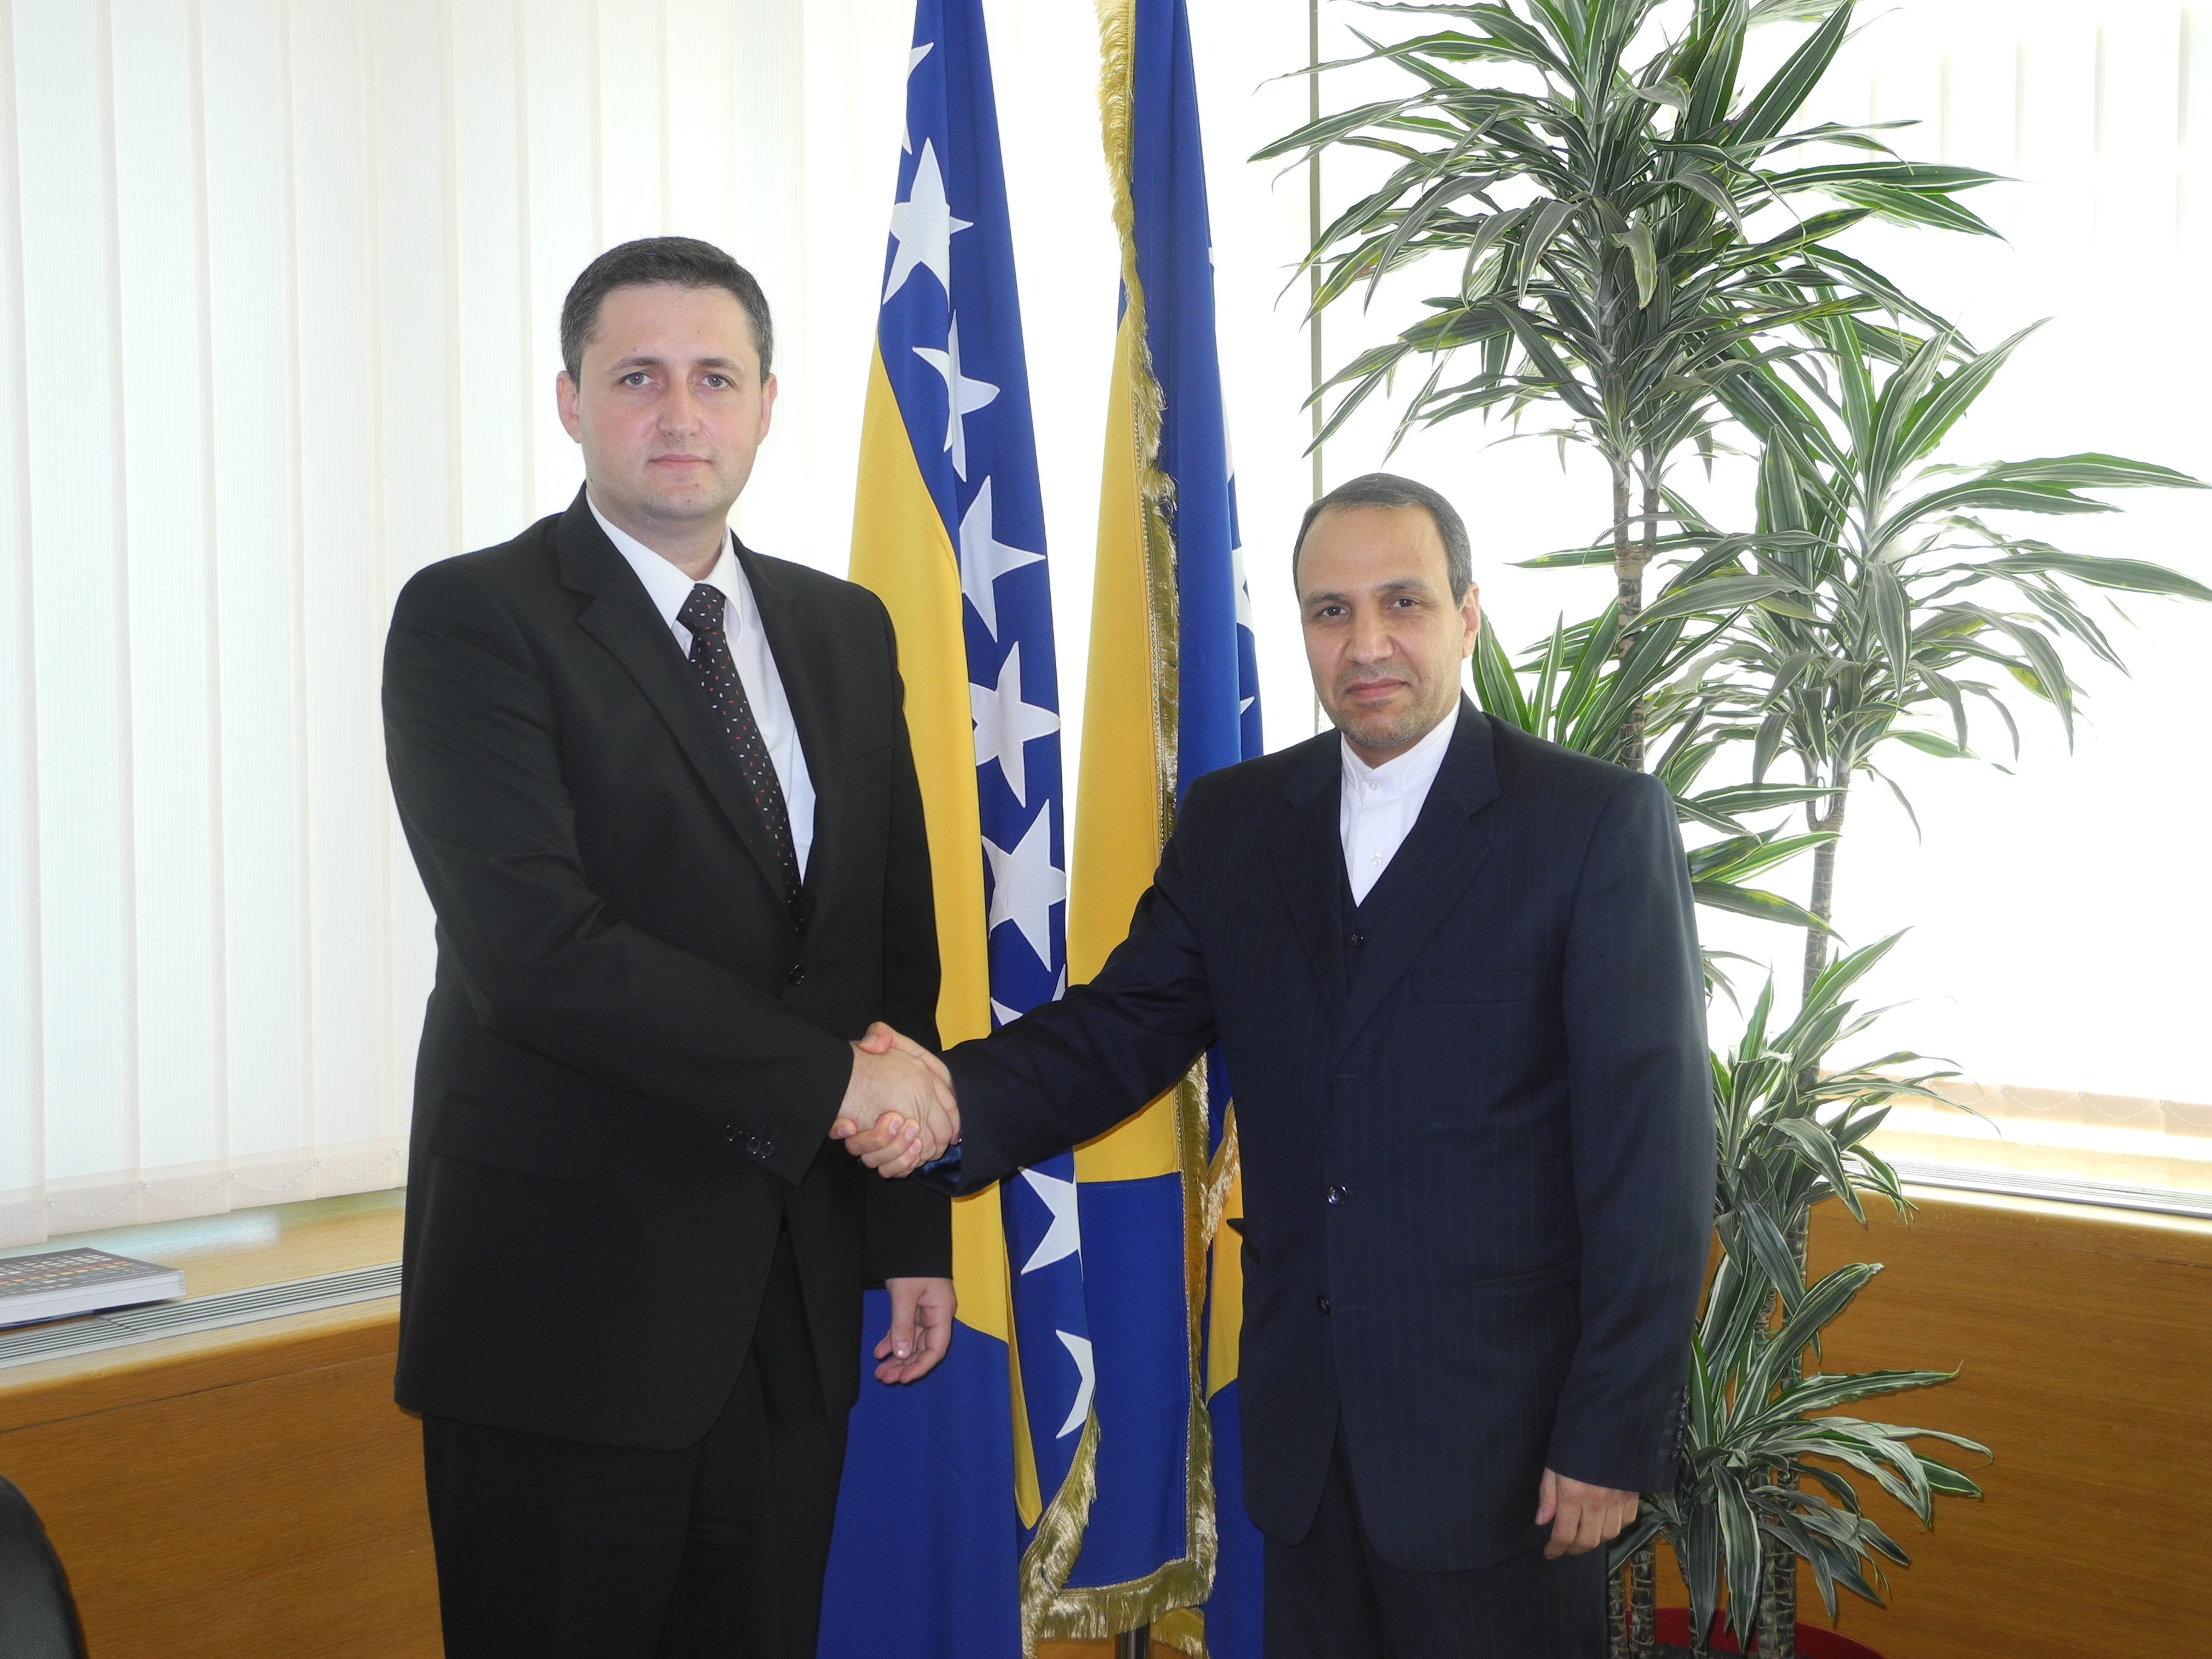 Dr. Denis Bećirović, Speaker of the House of Representatives of the Parliamentary Assembly of BiH met with the Ambassador of Iran to BiH